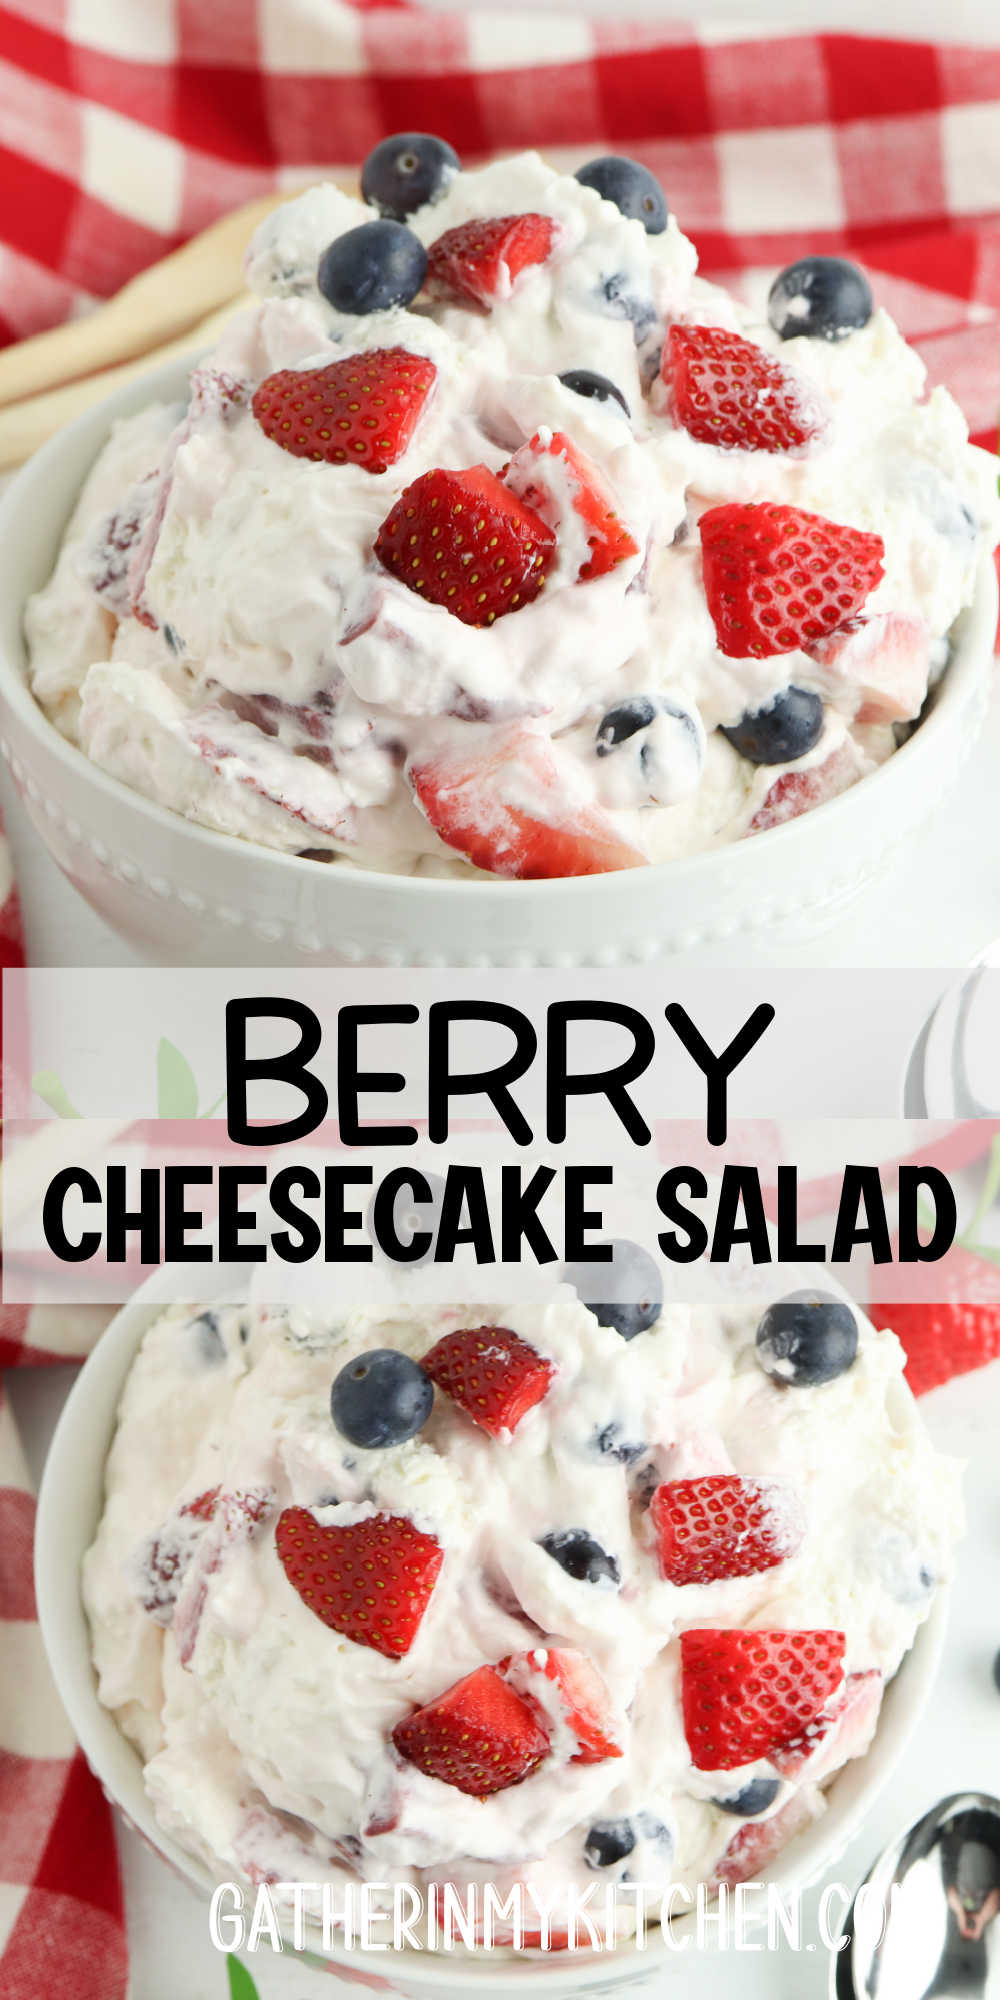 Pin image: top and bottom have pics of the berry cheesecake salad in a bowl, the middle says "Berry Cheesecake Salad".